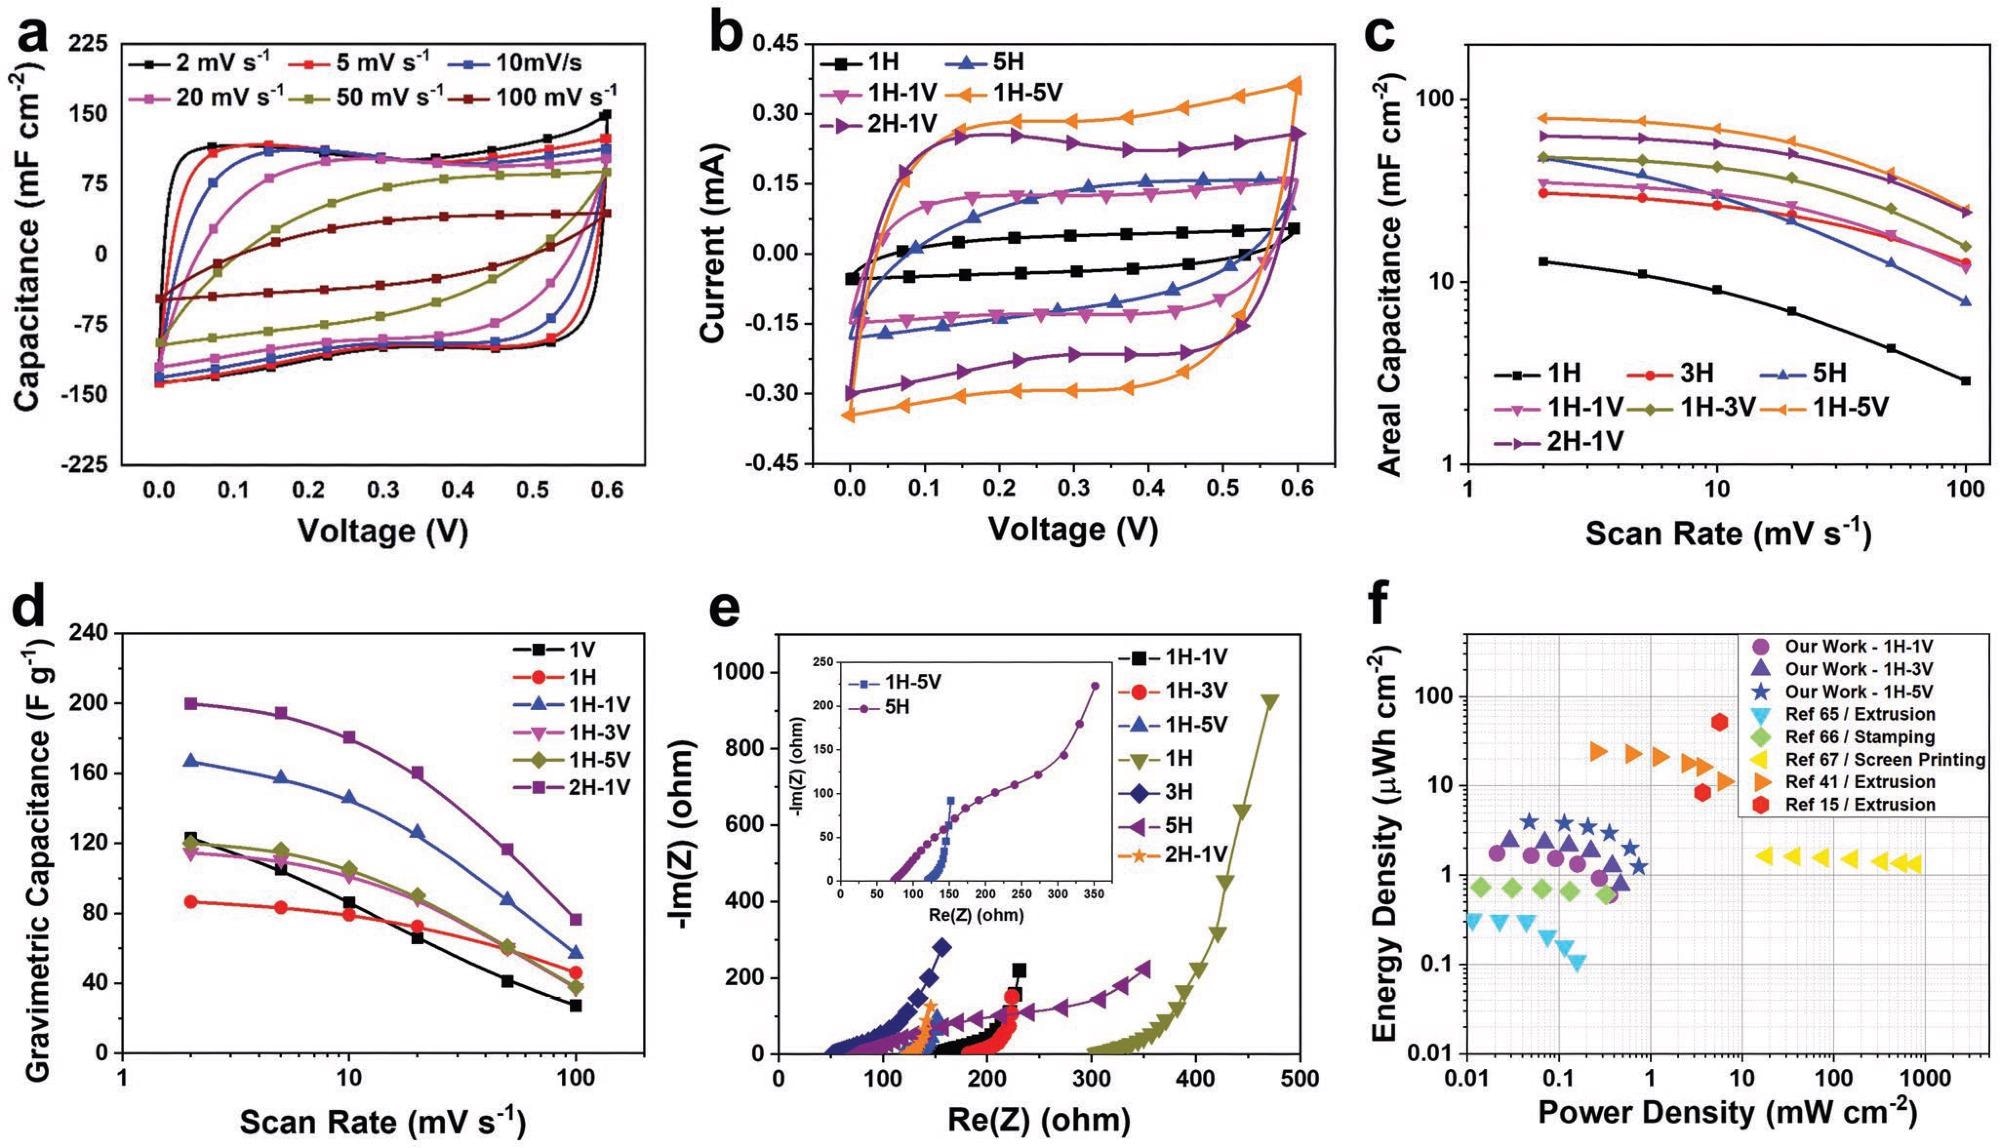 Electrochemical performance of 3DFP MXene-based MSC. a) CV at different scan rate for MSC-2H-1V. b,c) CV curves at 10 mV s-1 and areal capacitance of different 3DFP MSC devices. d) Gravimetric capacitance of MXene-based MSC compared with different MXene-based film with different thicknesses and sheets alignment. e) Nyquist plots for different MXene MSCs taken at 0 V versus the open-circuit potential. The inset shows the Nyquist plots of the MSC-5H and MSC-1H-5V. f) Ragone plots of the 3DFP Ti3C2Tx-based MSCs together with other reported values for comparison.